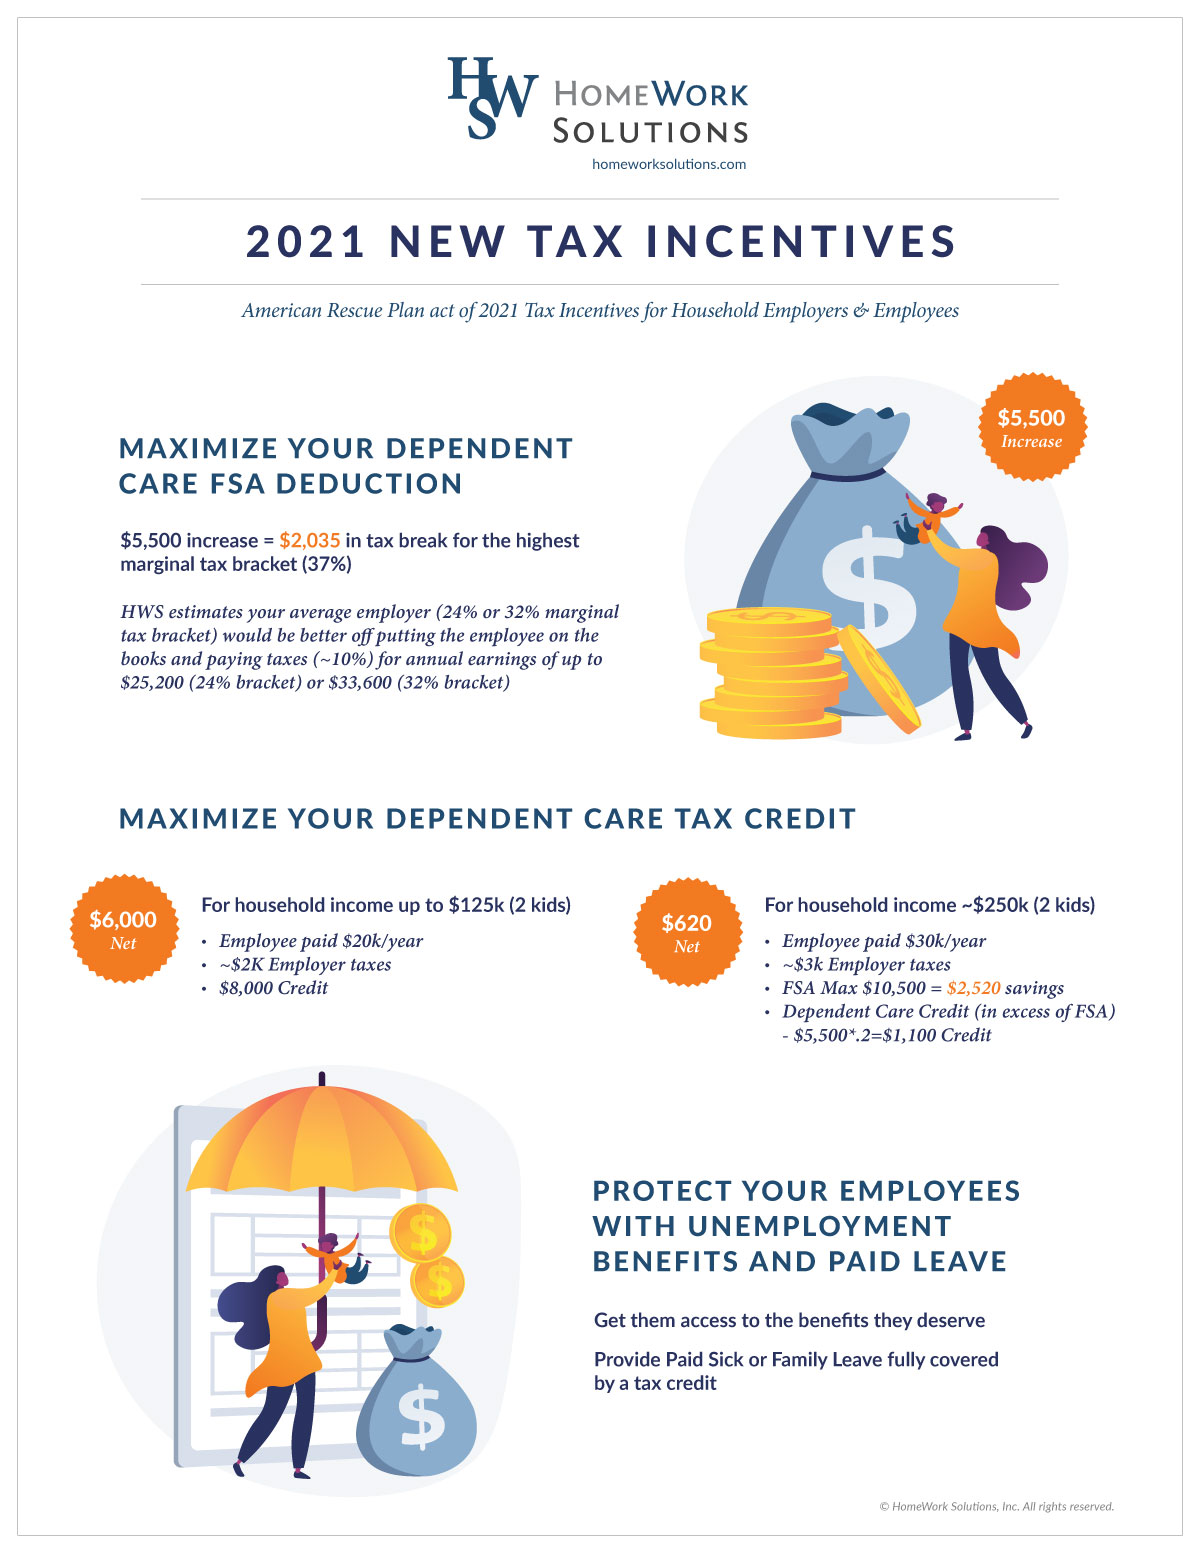 HomeWork-Solutions-2021-New-Tax-Incentives